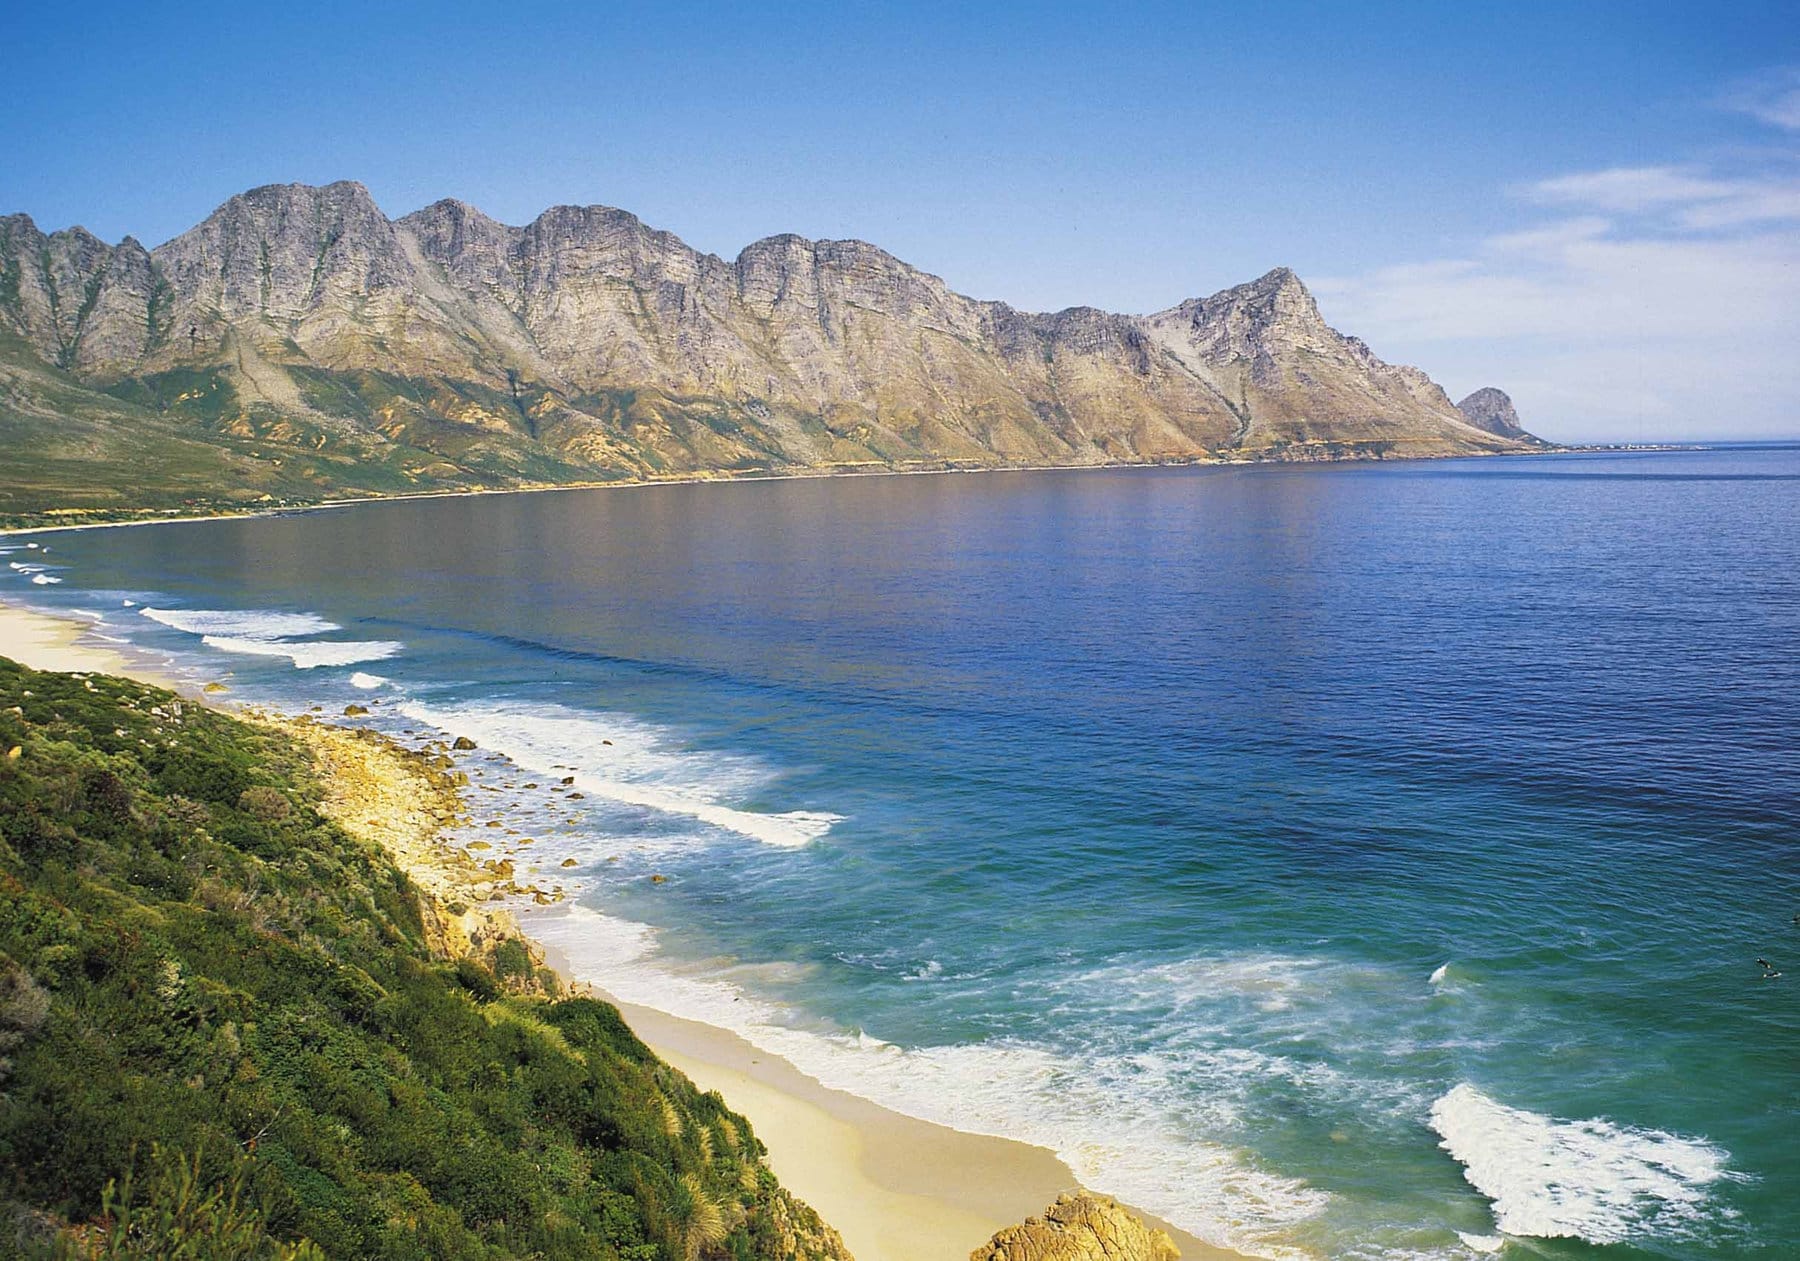 Explore South Africa's most scenic coastal drive